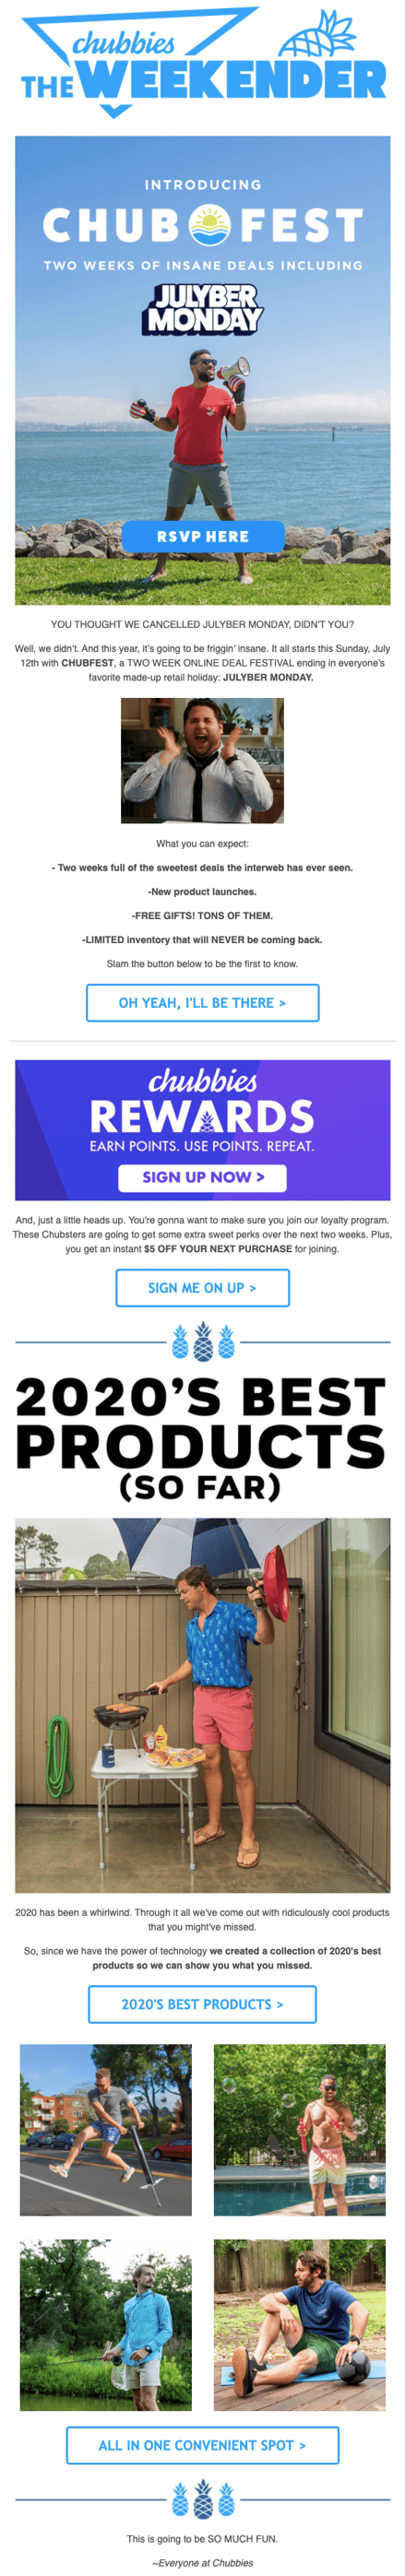 brand awareness email example